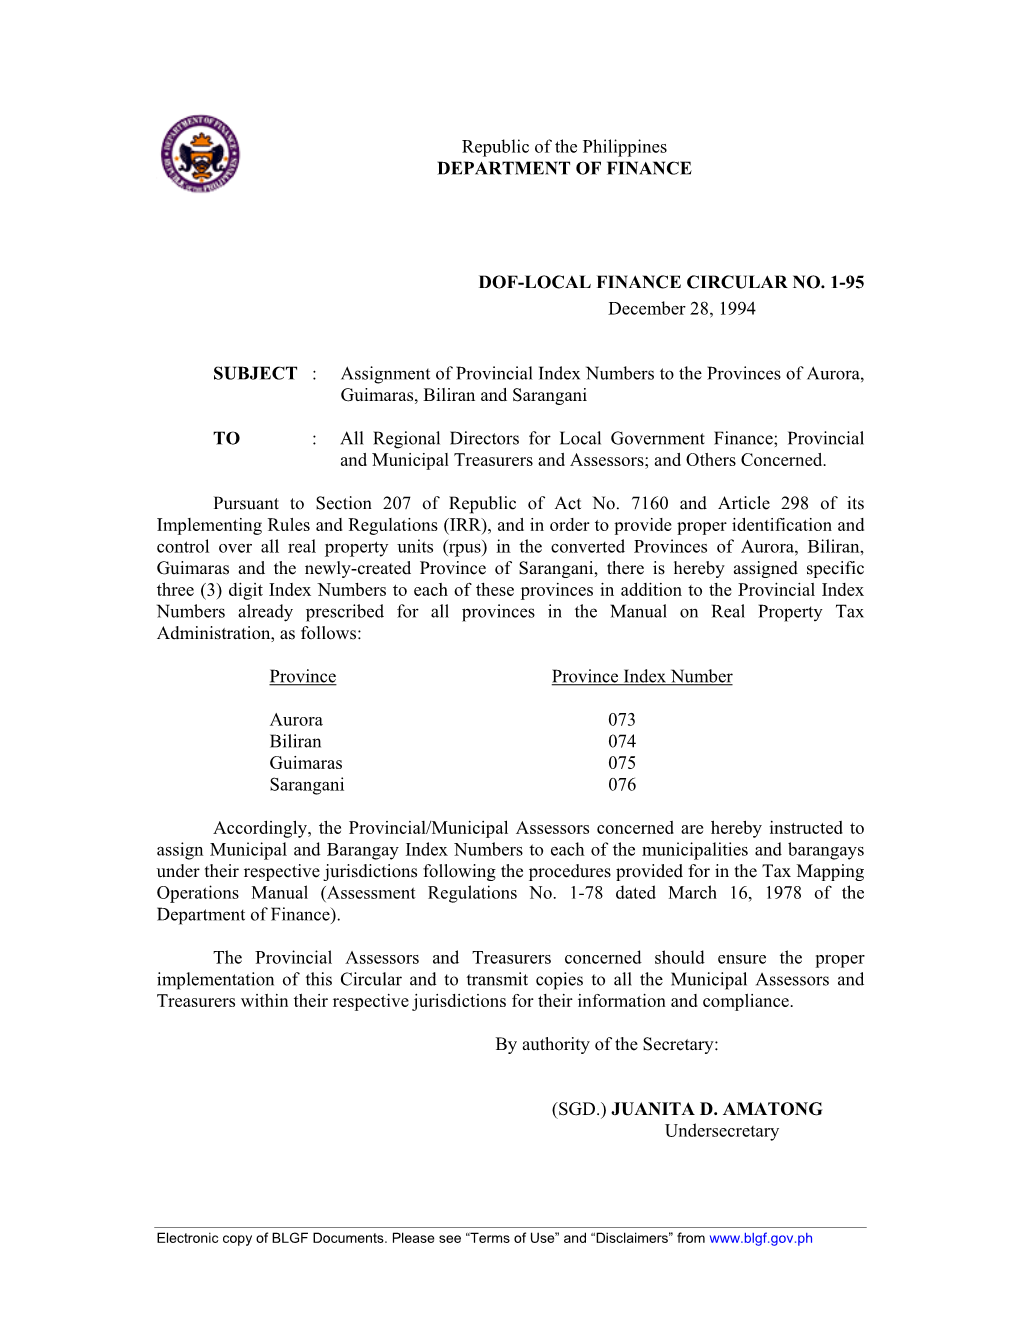 Republic of the Philippines DEPARTMENT of FINANCE DOF